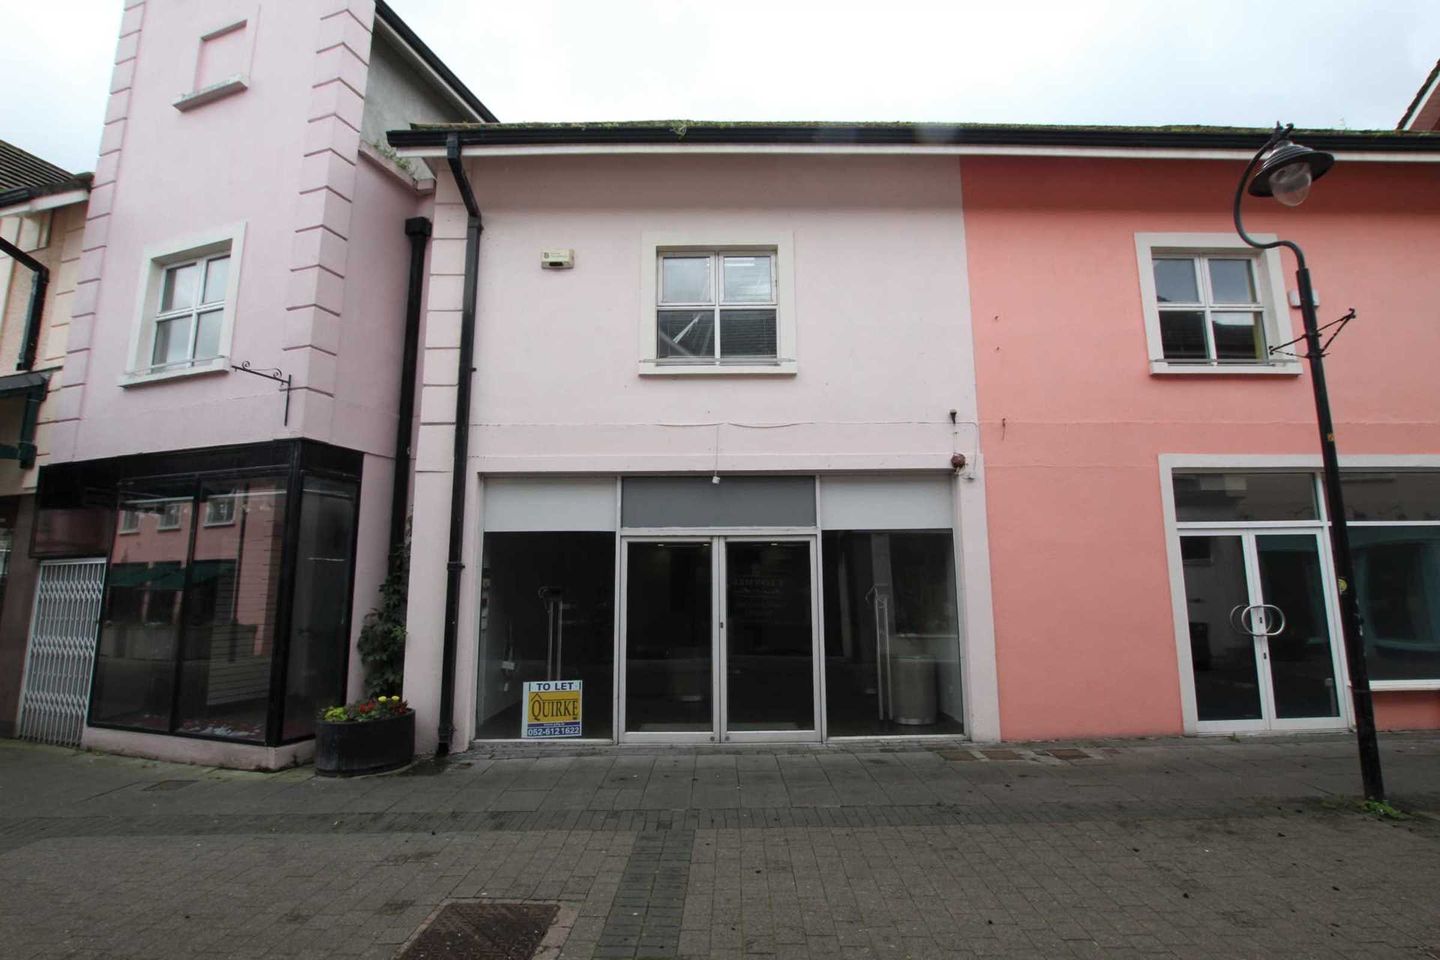 33 (B3) Market Place, Clonmel, Co. Tipperary